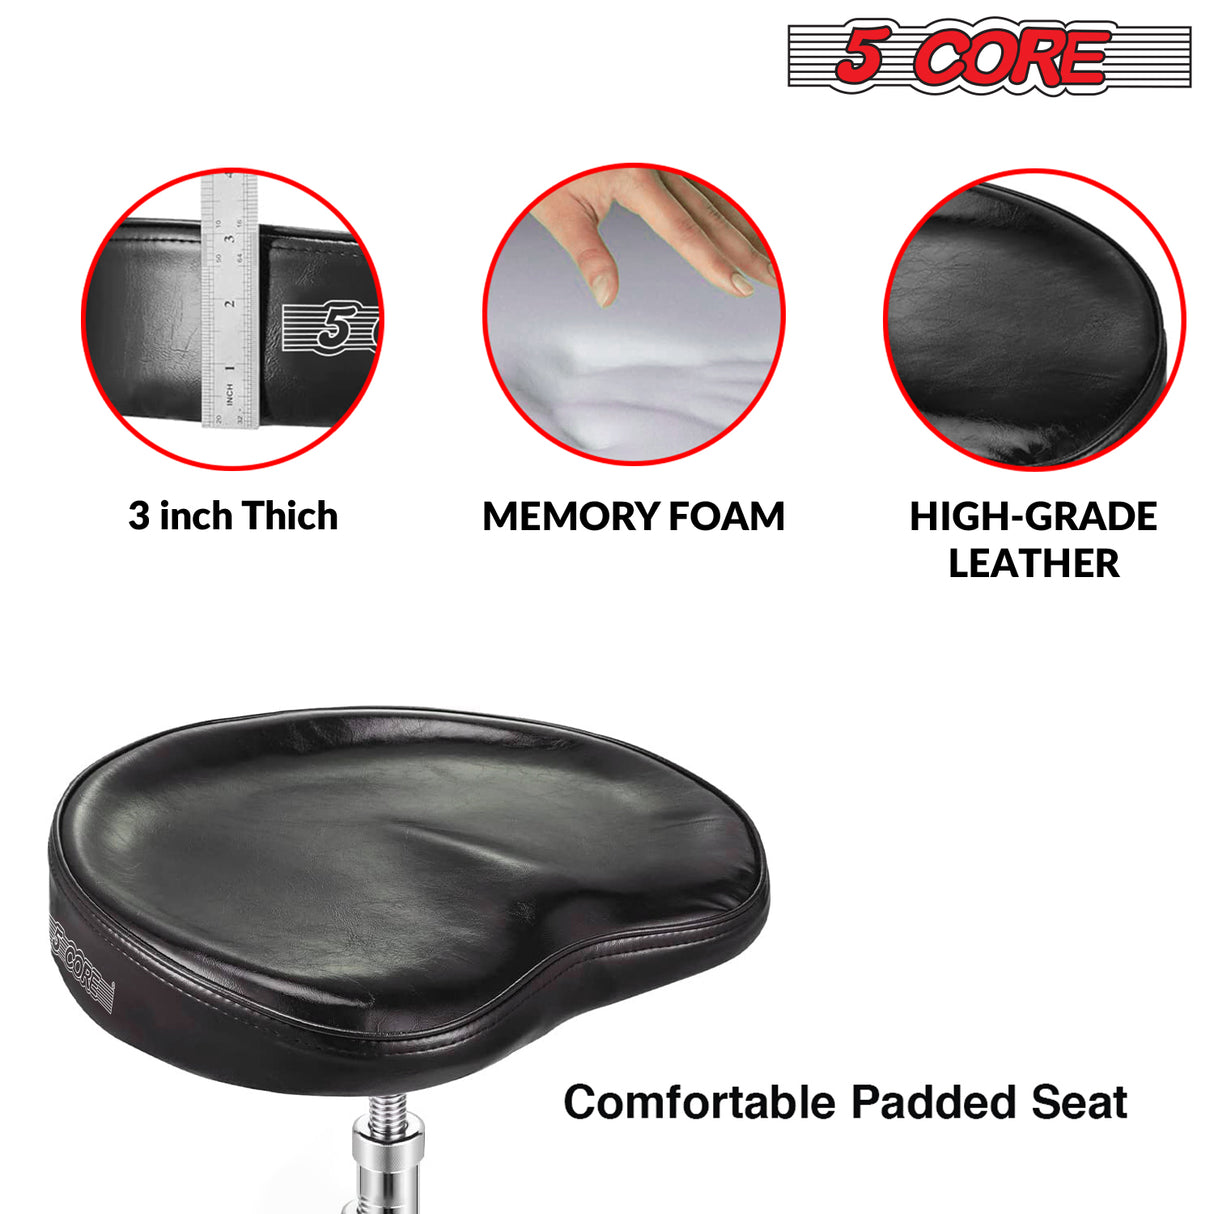 5 Core Drum Throne Saddle Black| Heavy Duty Height Adjustable Padded Comfortable Drum Seat| Stools Chair  Style with Double Braced Anti-Slip Feet and Two Drumsticks for Adults Drummers- DS CH BLK SDL HD